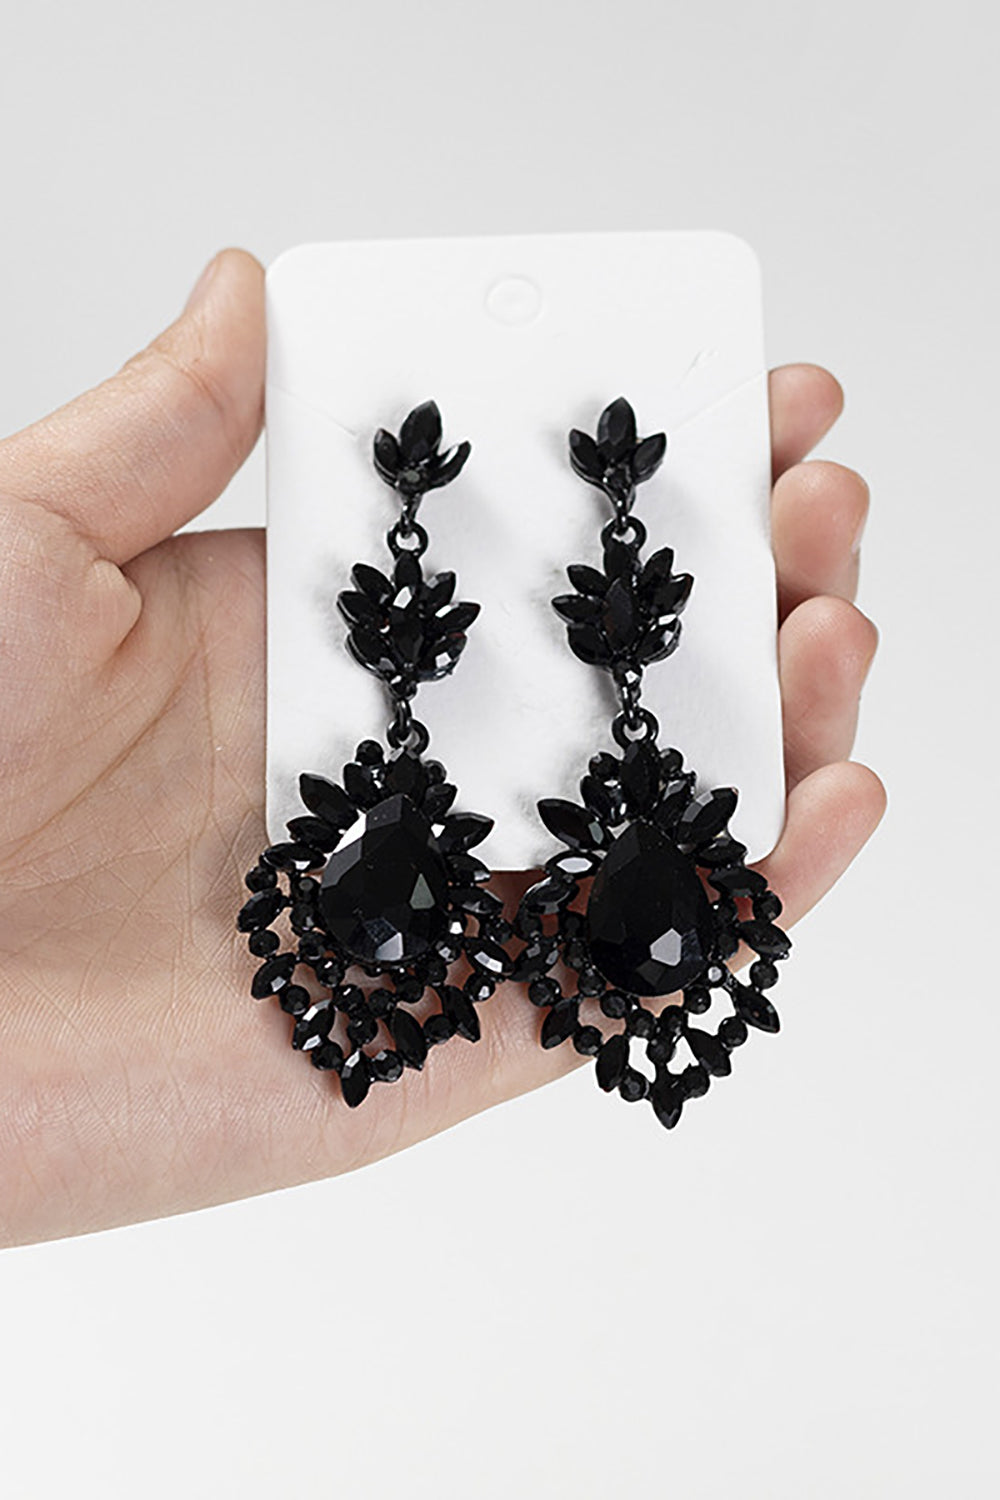 Stylish Black Geometric Drop Style Earrings for Party